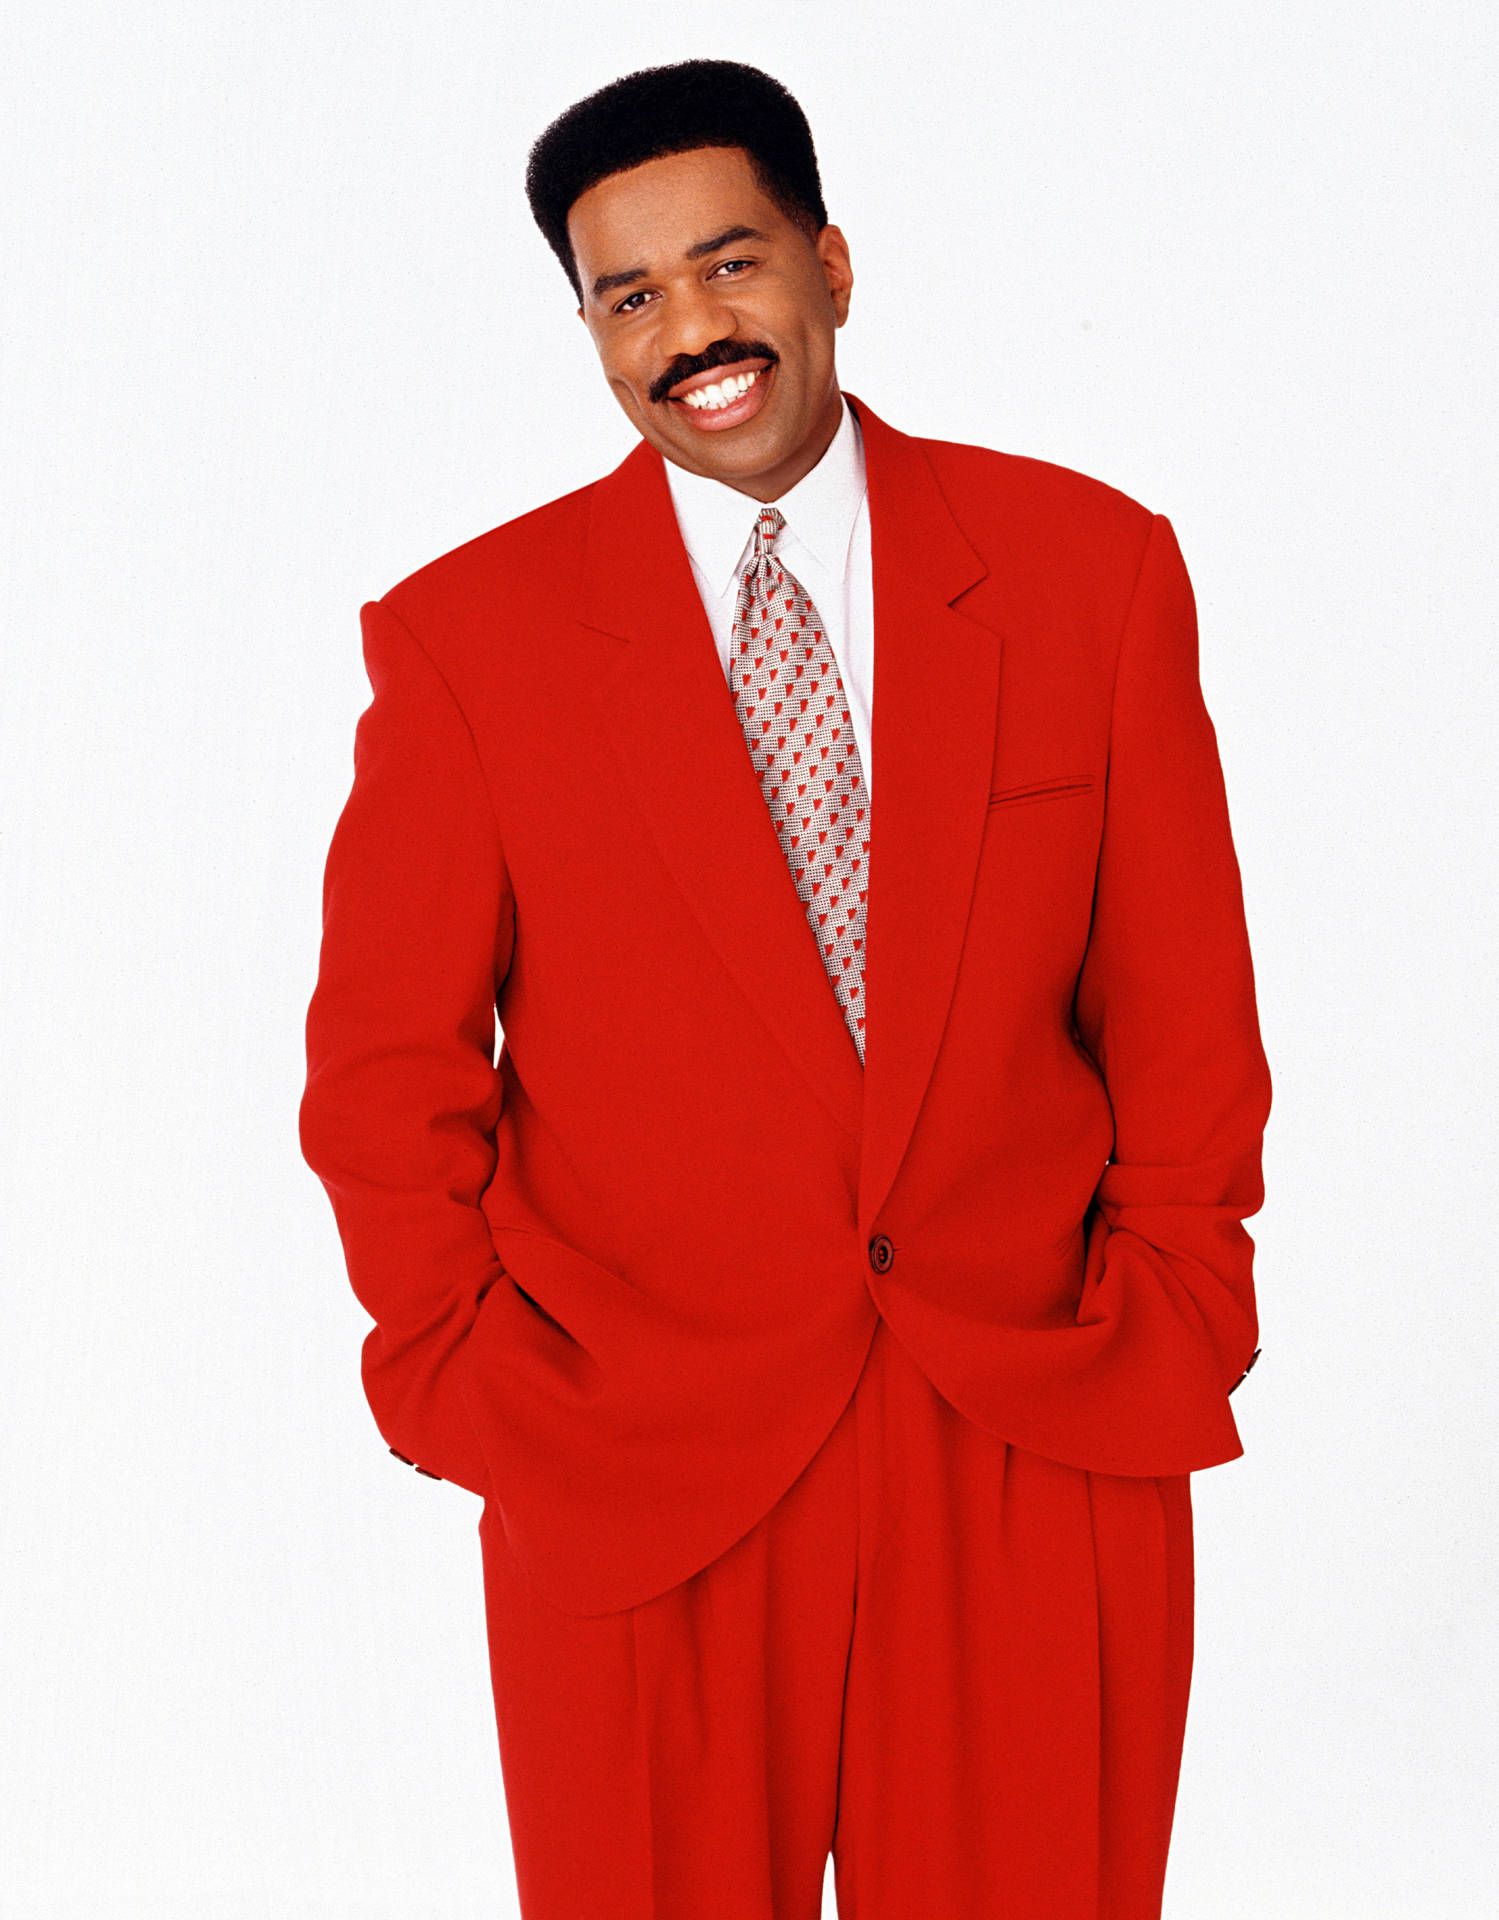 Steve Harvey Smiling In A Red Suit